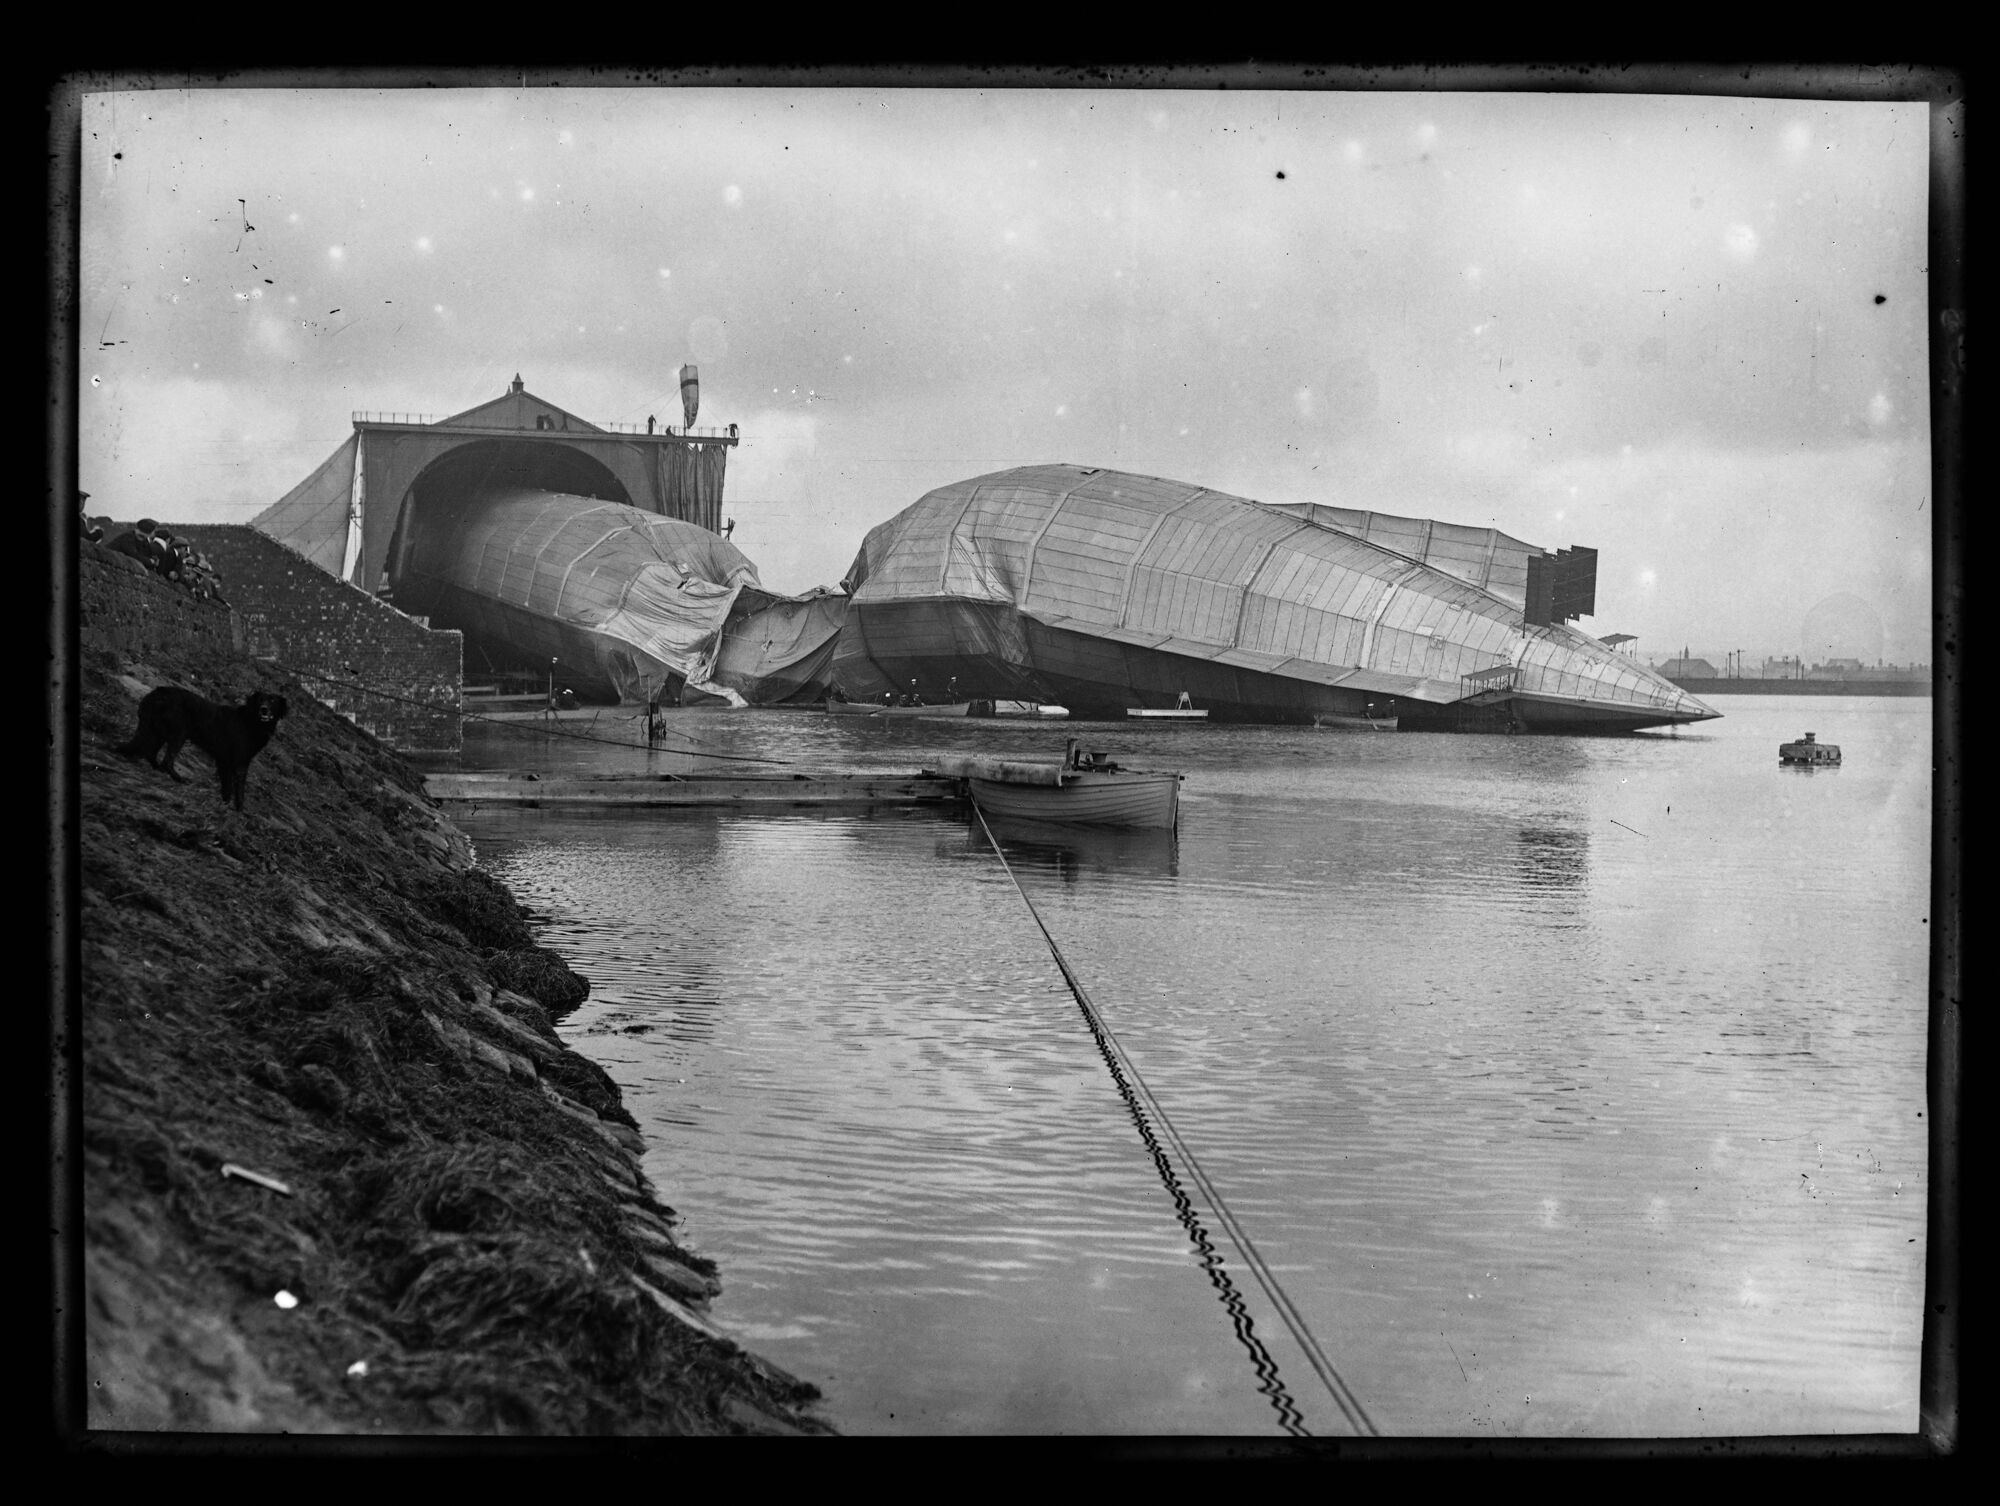 His Majesty's Airship No1 'Mayfly', Cavendish Dock, Barrow in Furness